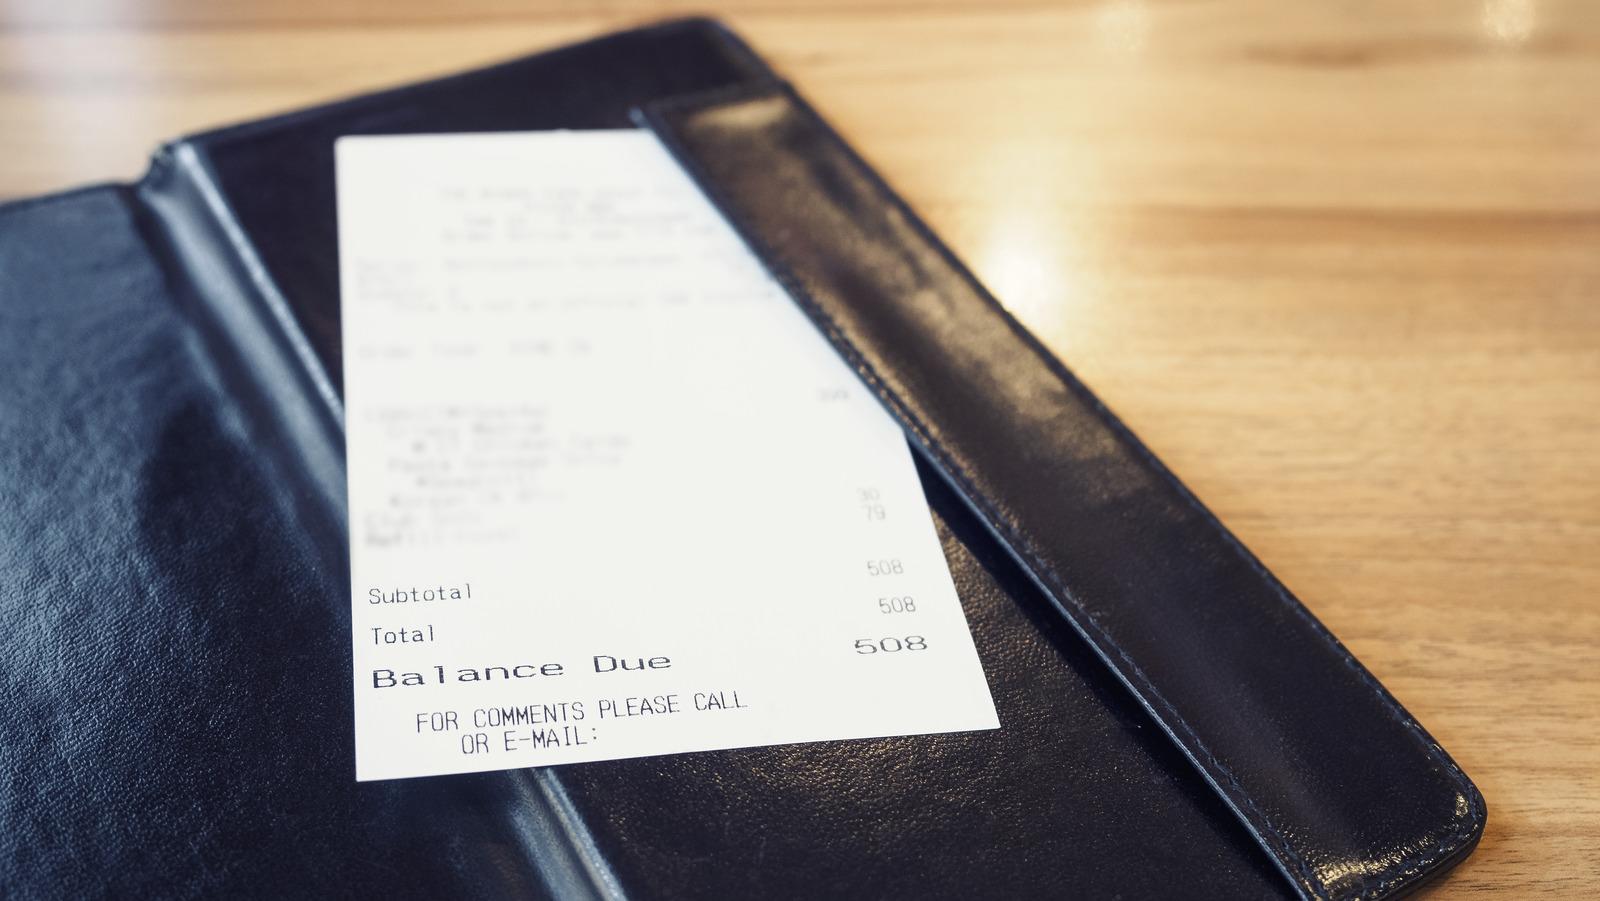 The Courteous Way To Ask For Separate Checks At A Restaurant